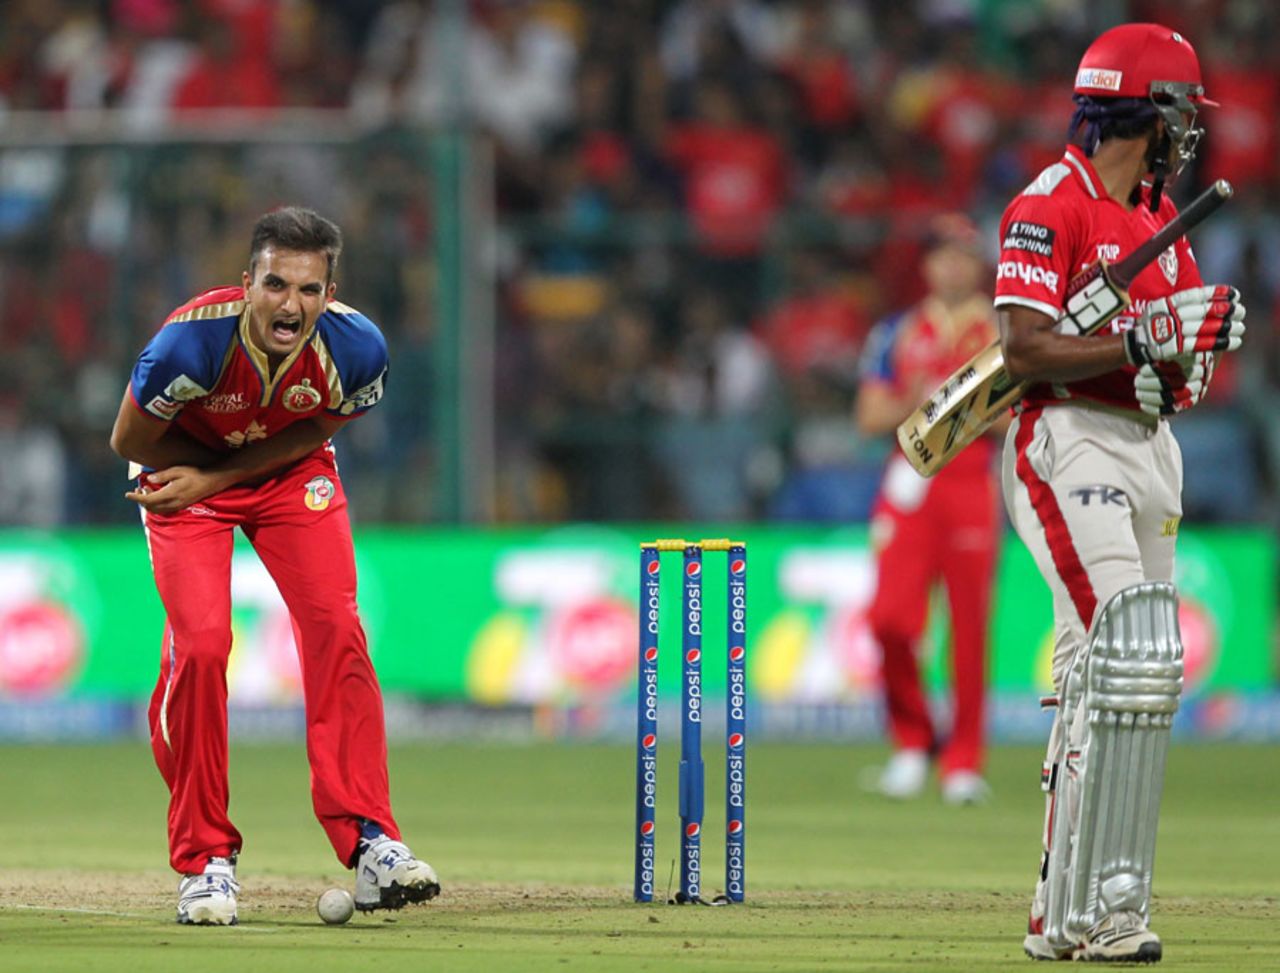 Harshal Patel grimaces after being hit by a throw from AB de Villiers, Royal Challengers Bangalore v Kings XI Punjab, IPL 2014, Bangalore, May 9 2014